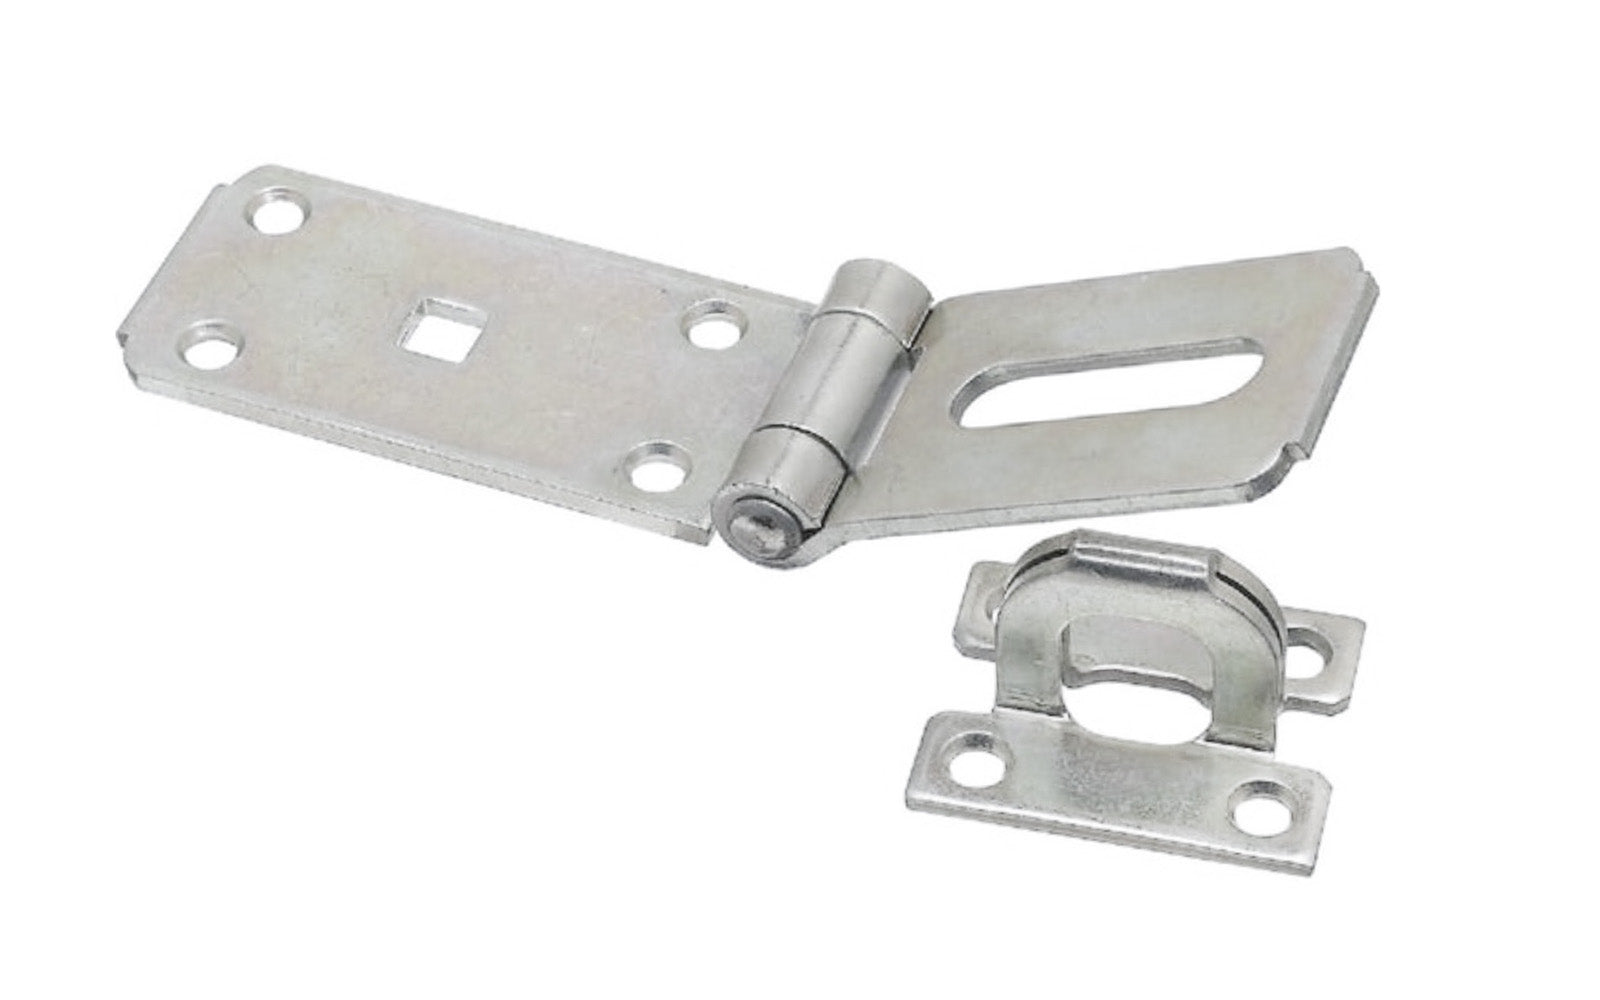 This 7-1/4" zinc-plated extra heavy duty hasp is designed for use on around-the-corner applications. For security, all screws are concealed when hasp is closed. Includes a rigid, case-hardened steel staple for extra security. Made of steel material with a zinc plated finish. National Hardware Model No. N103-176.